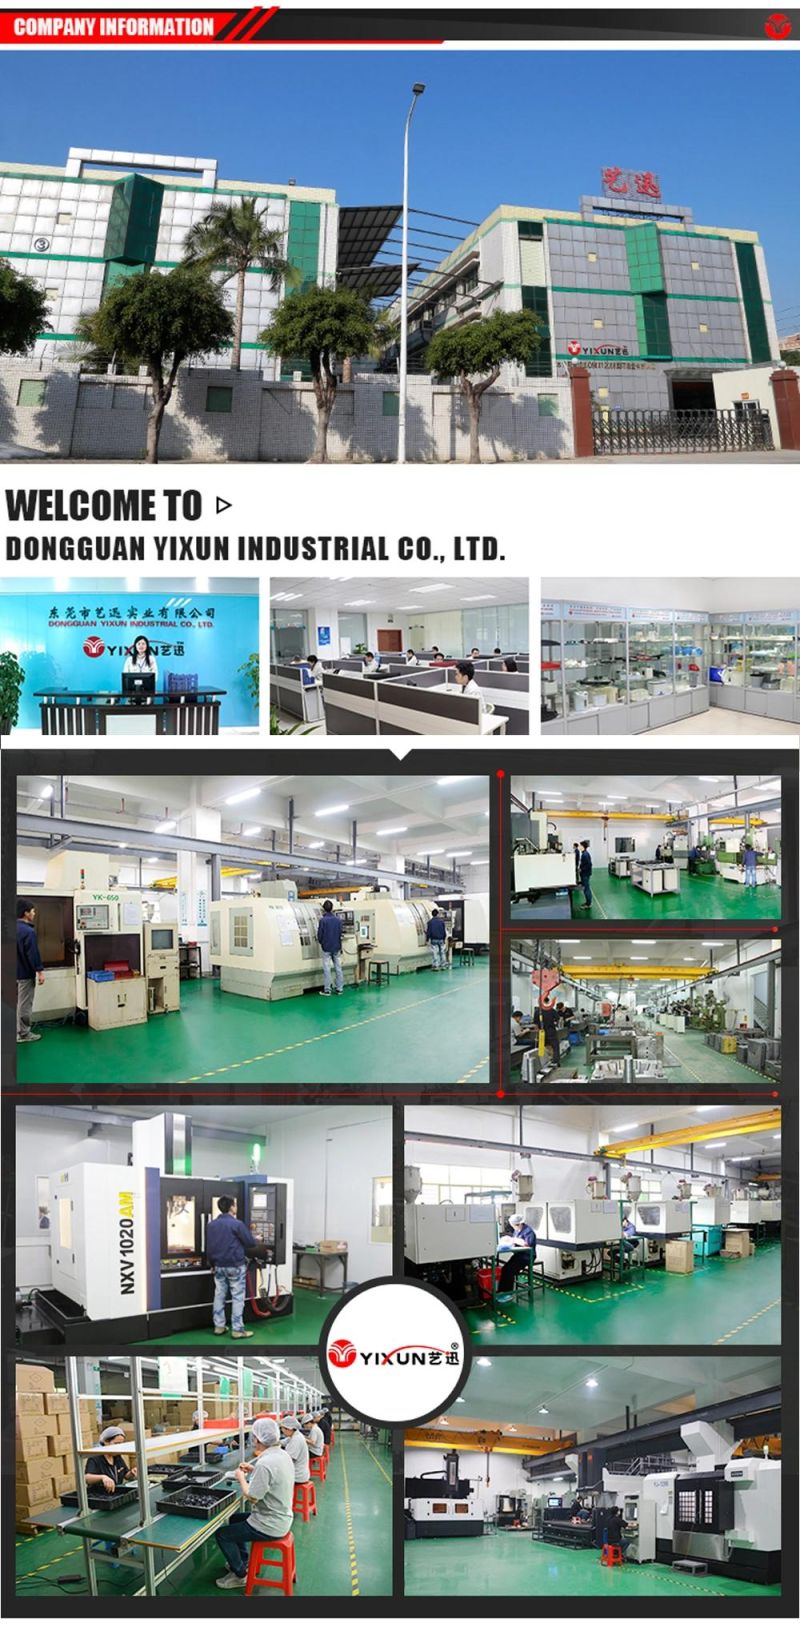 China Dongguan Mould Maker for Breath Test Anesthesi Medical Equipment Shell Housing Plastic Injection Mould Moulding